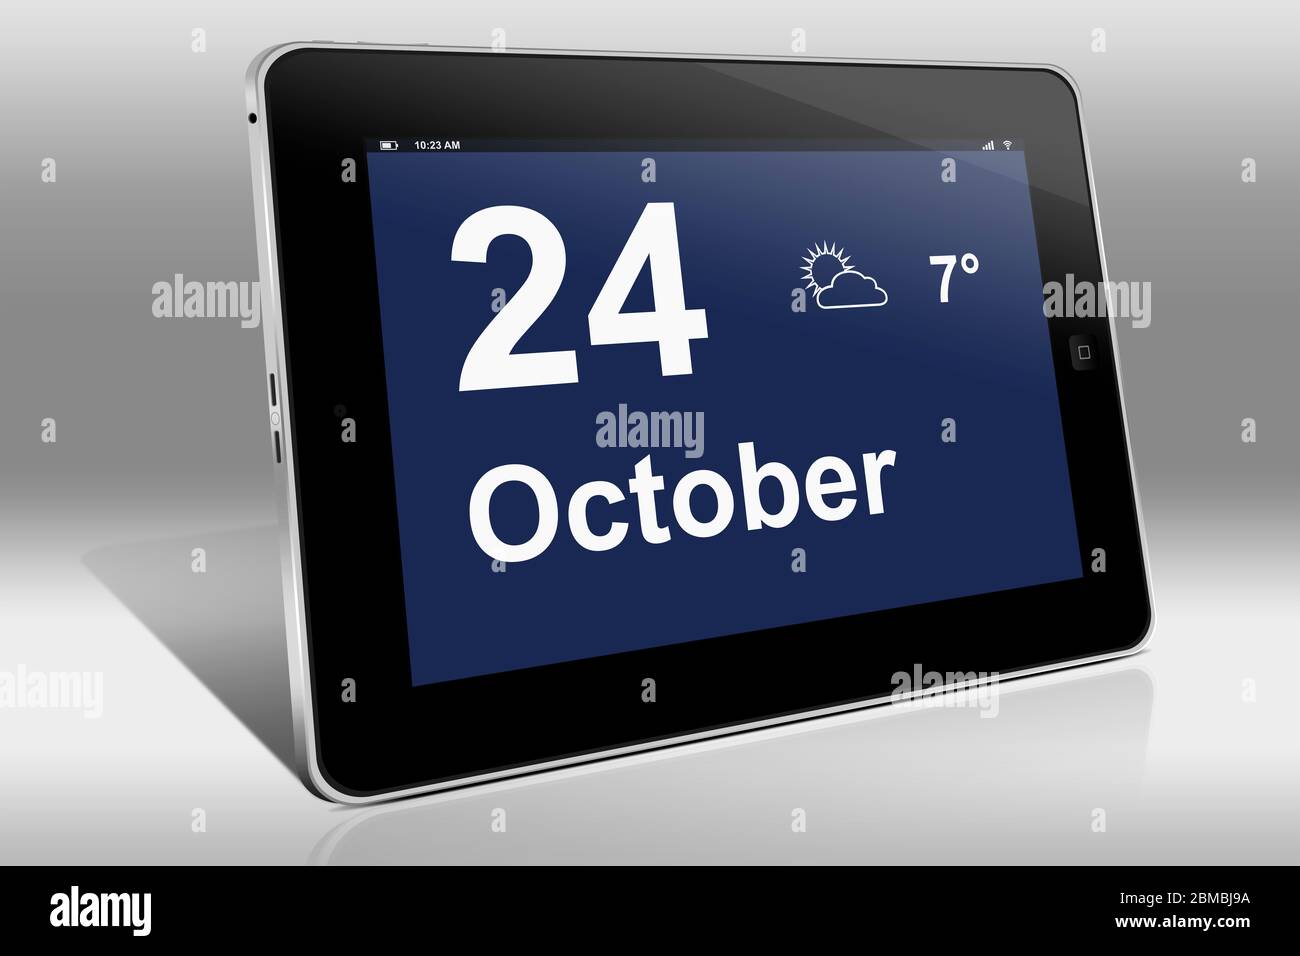 A tablet computer displays a calendar in English language with the date October 24th | Ein Tablet-Computer zeigt in Englischer Sprache den 24. Oktober Stock Photo